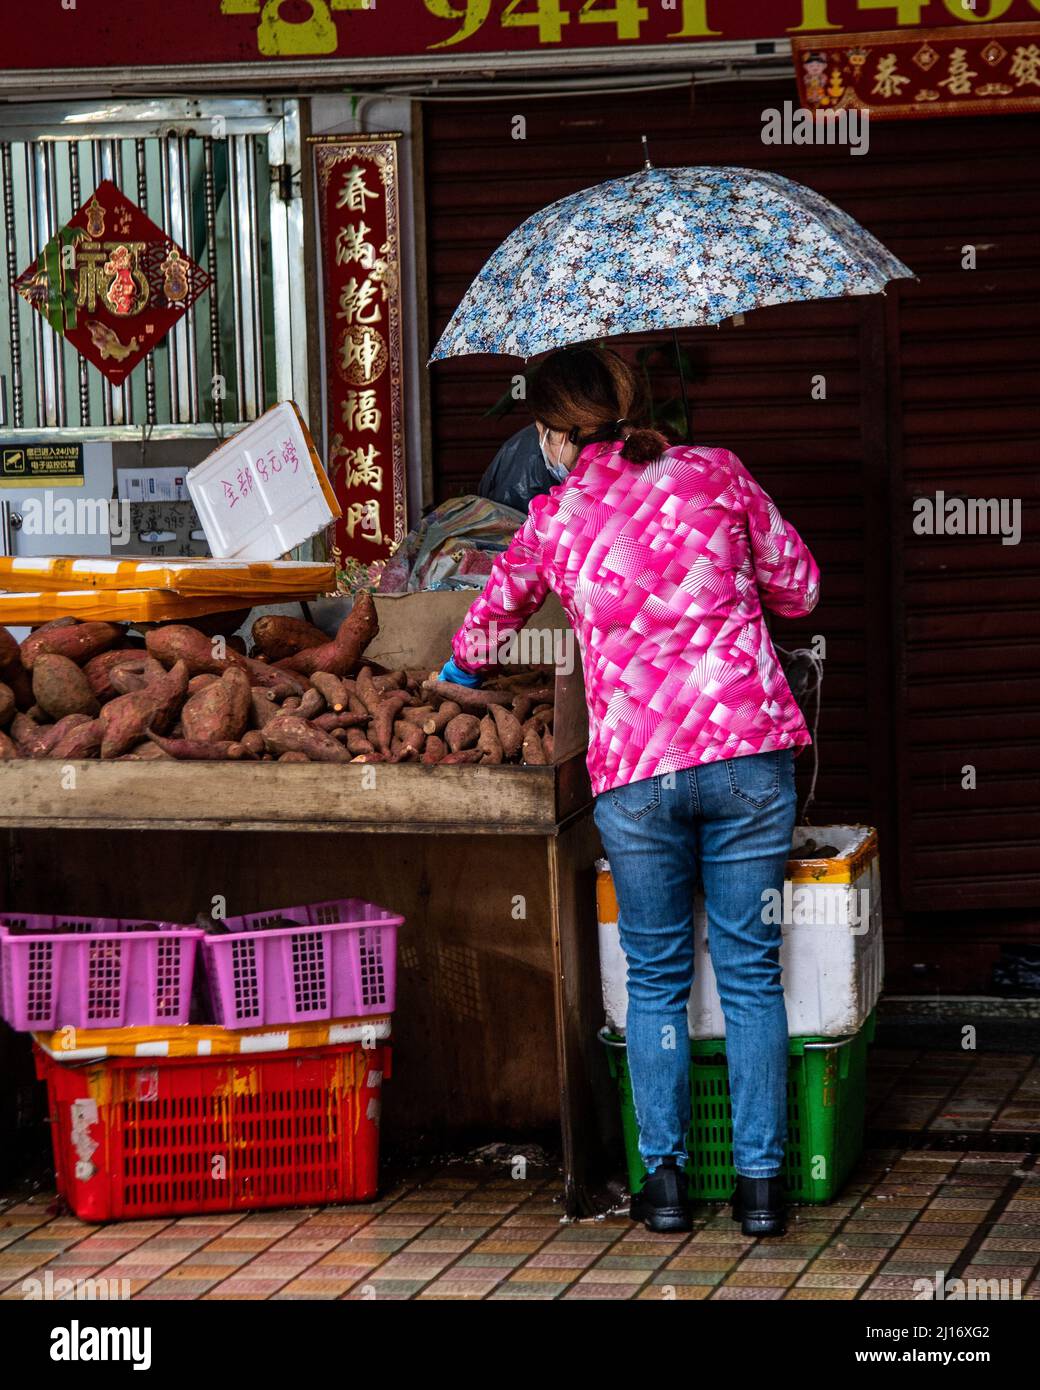 A shopper carrying an umbrella, looks through sweet potatoes during her shopping at a market as a northern monsoon brings cooler weather and rain to Hong Kong. A rainy, spring day in Hong Kong. Stock Photo